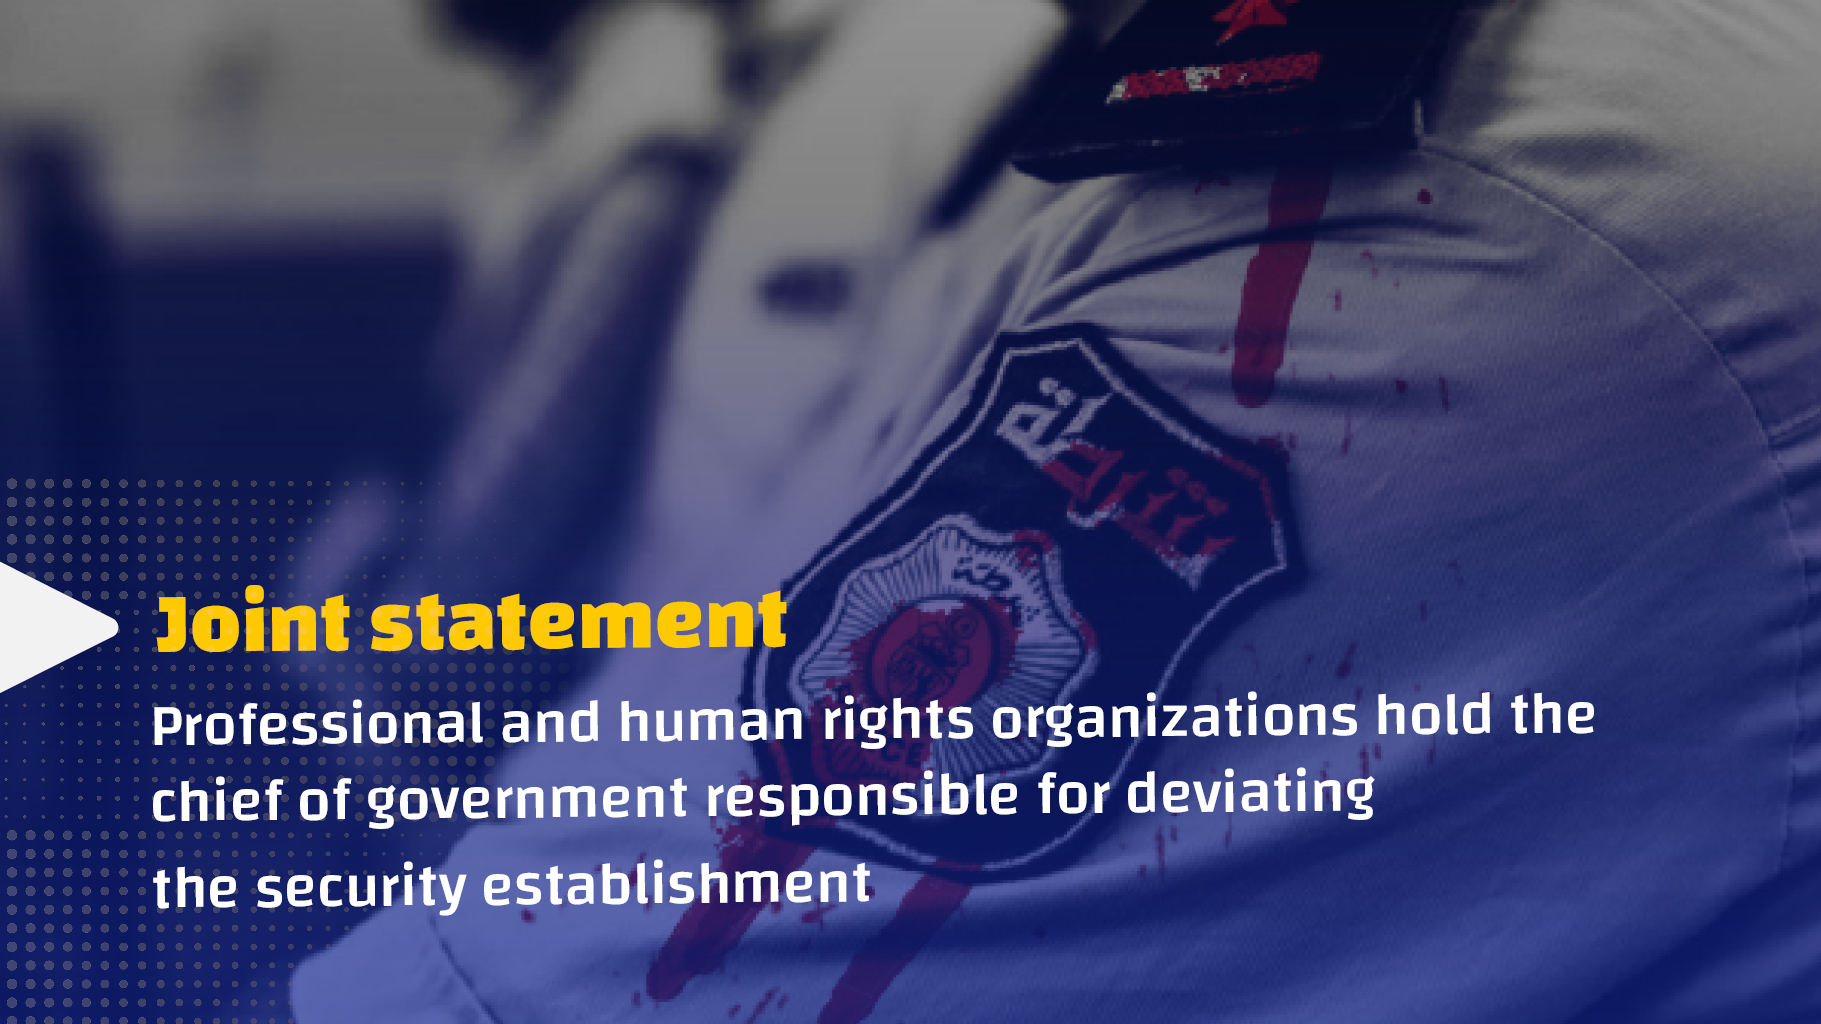 joint statement: Professional and human rights organizations hold the chief of government responsible for deviating the security establishment.